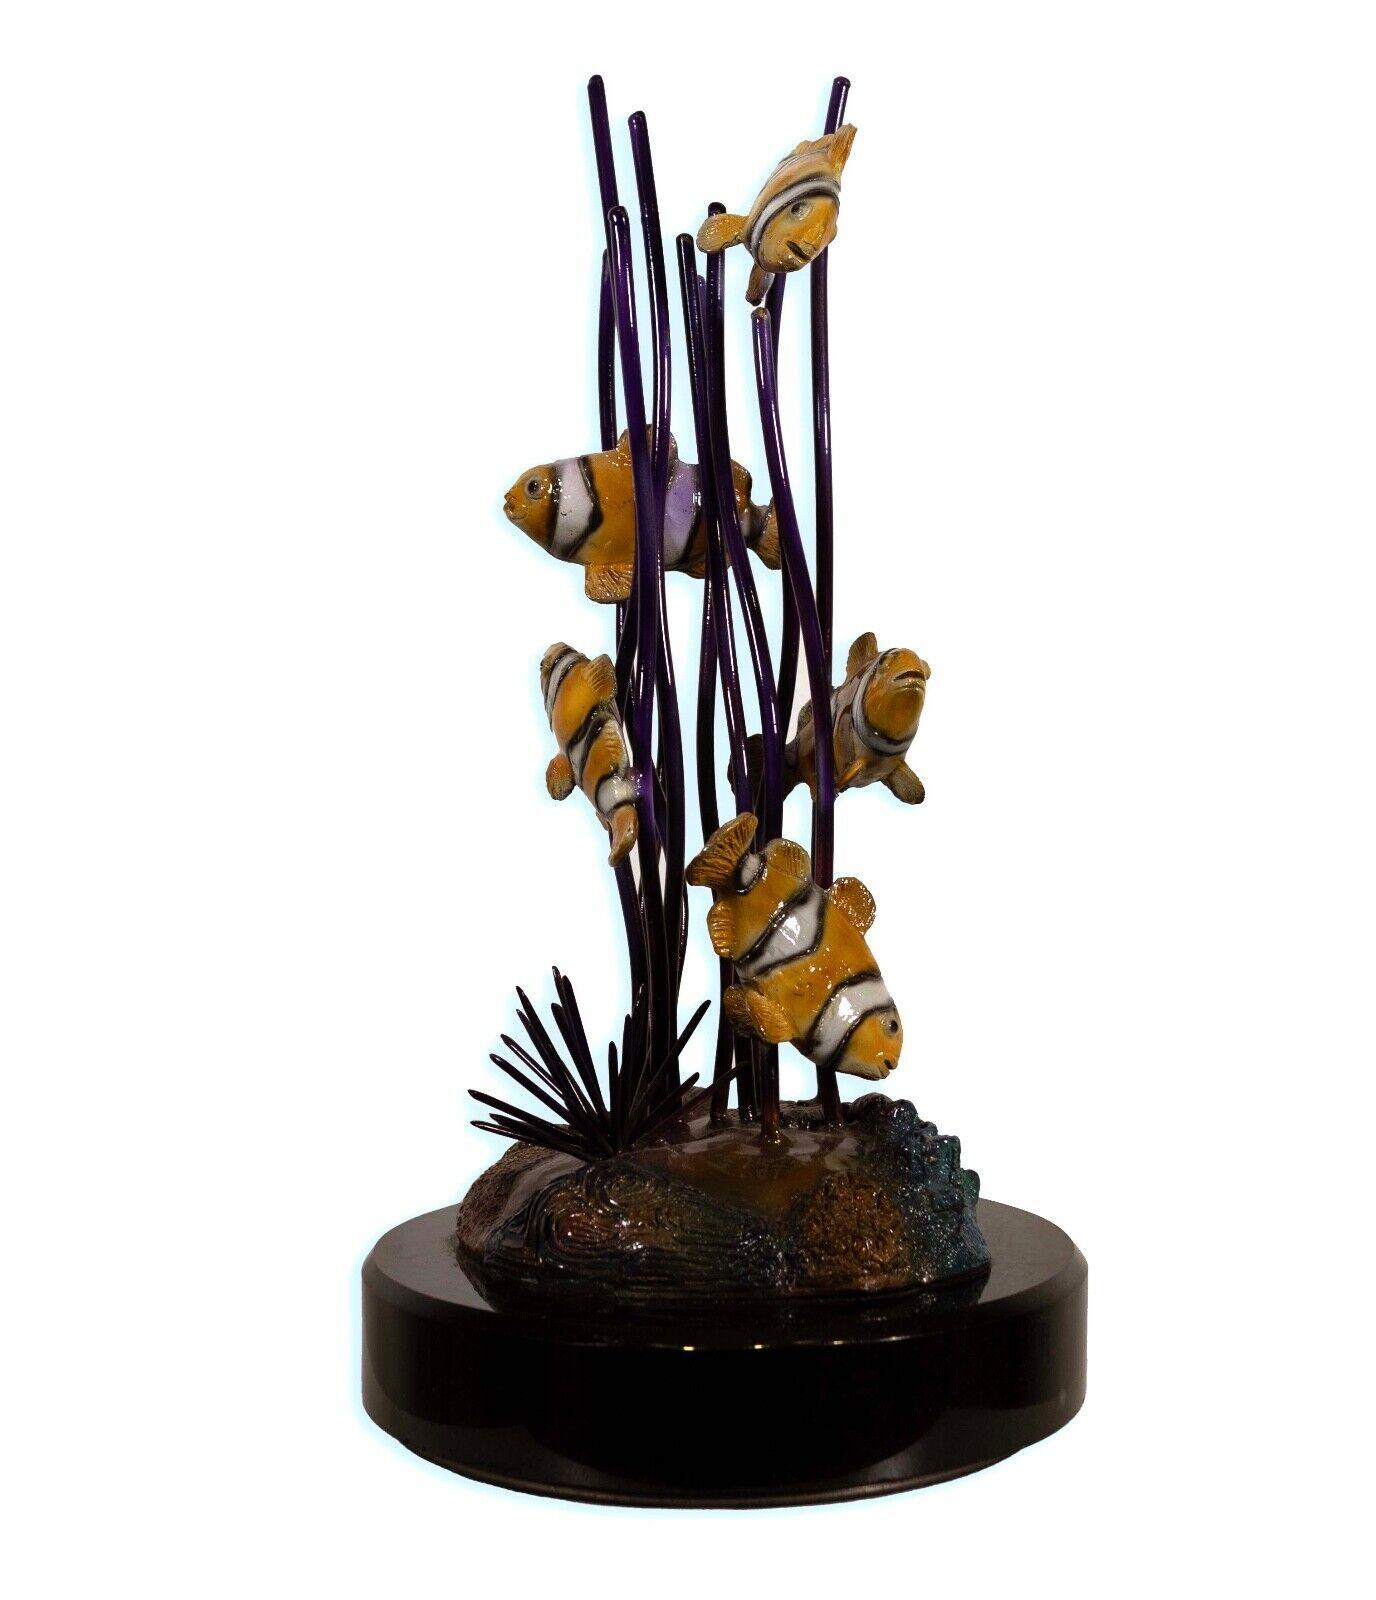 J Townsend Sealife Clownfish in Coral Bronze & Ceramic Sculpture Signed 7/399 In Good Condition For Sale In Keego Harbor, MI